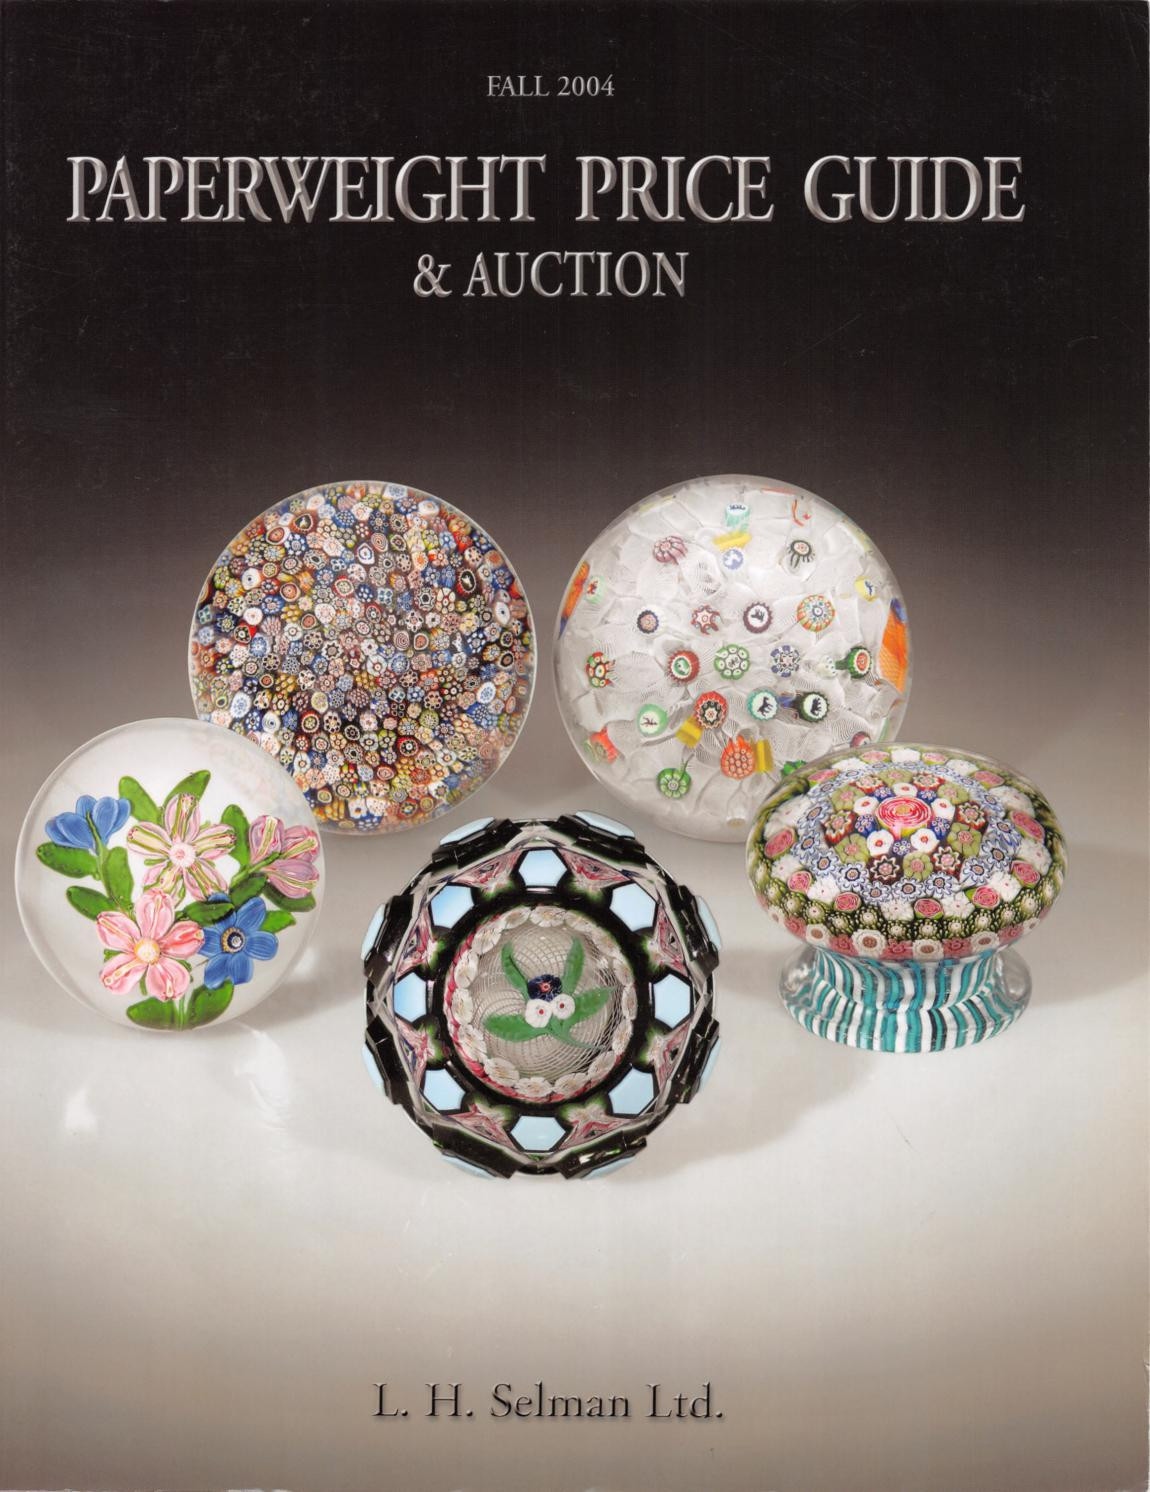 peter max vase of flowers price of l h selman ltd s fall 2004 paperweight price guide by l h selman regarding s fall 2004 paperweight price guide by l h selman issuu